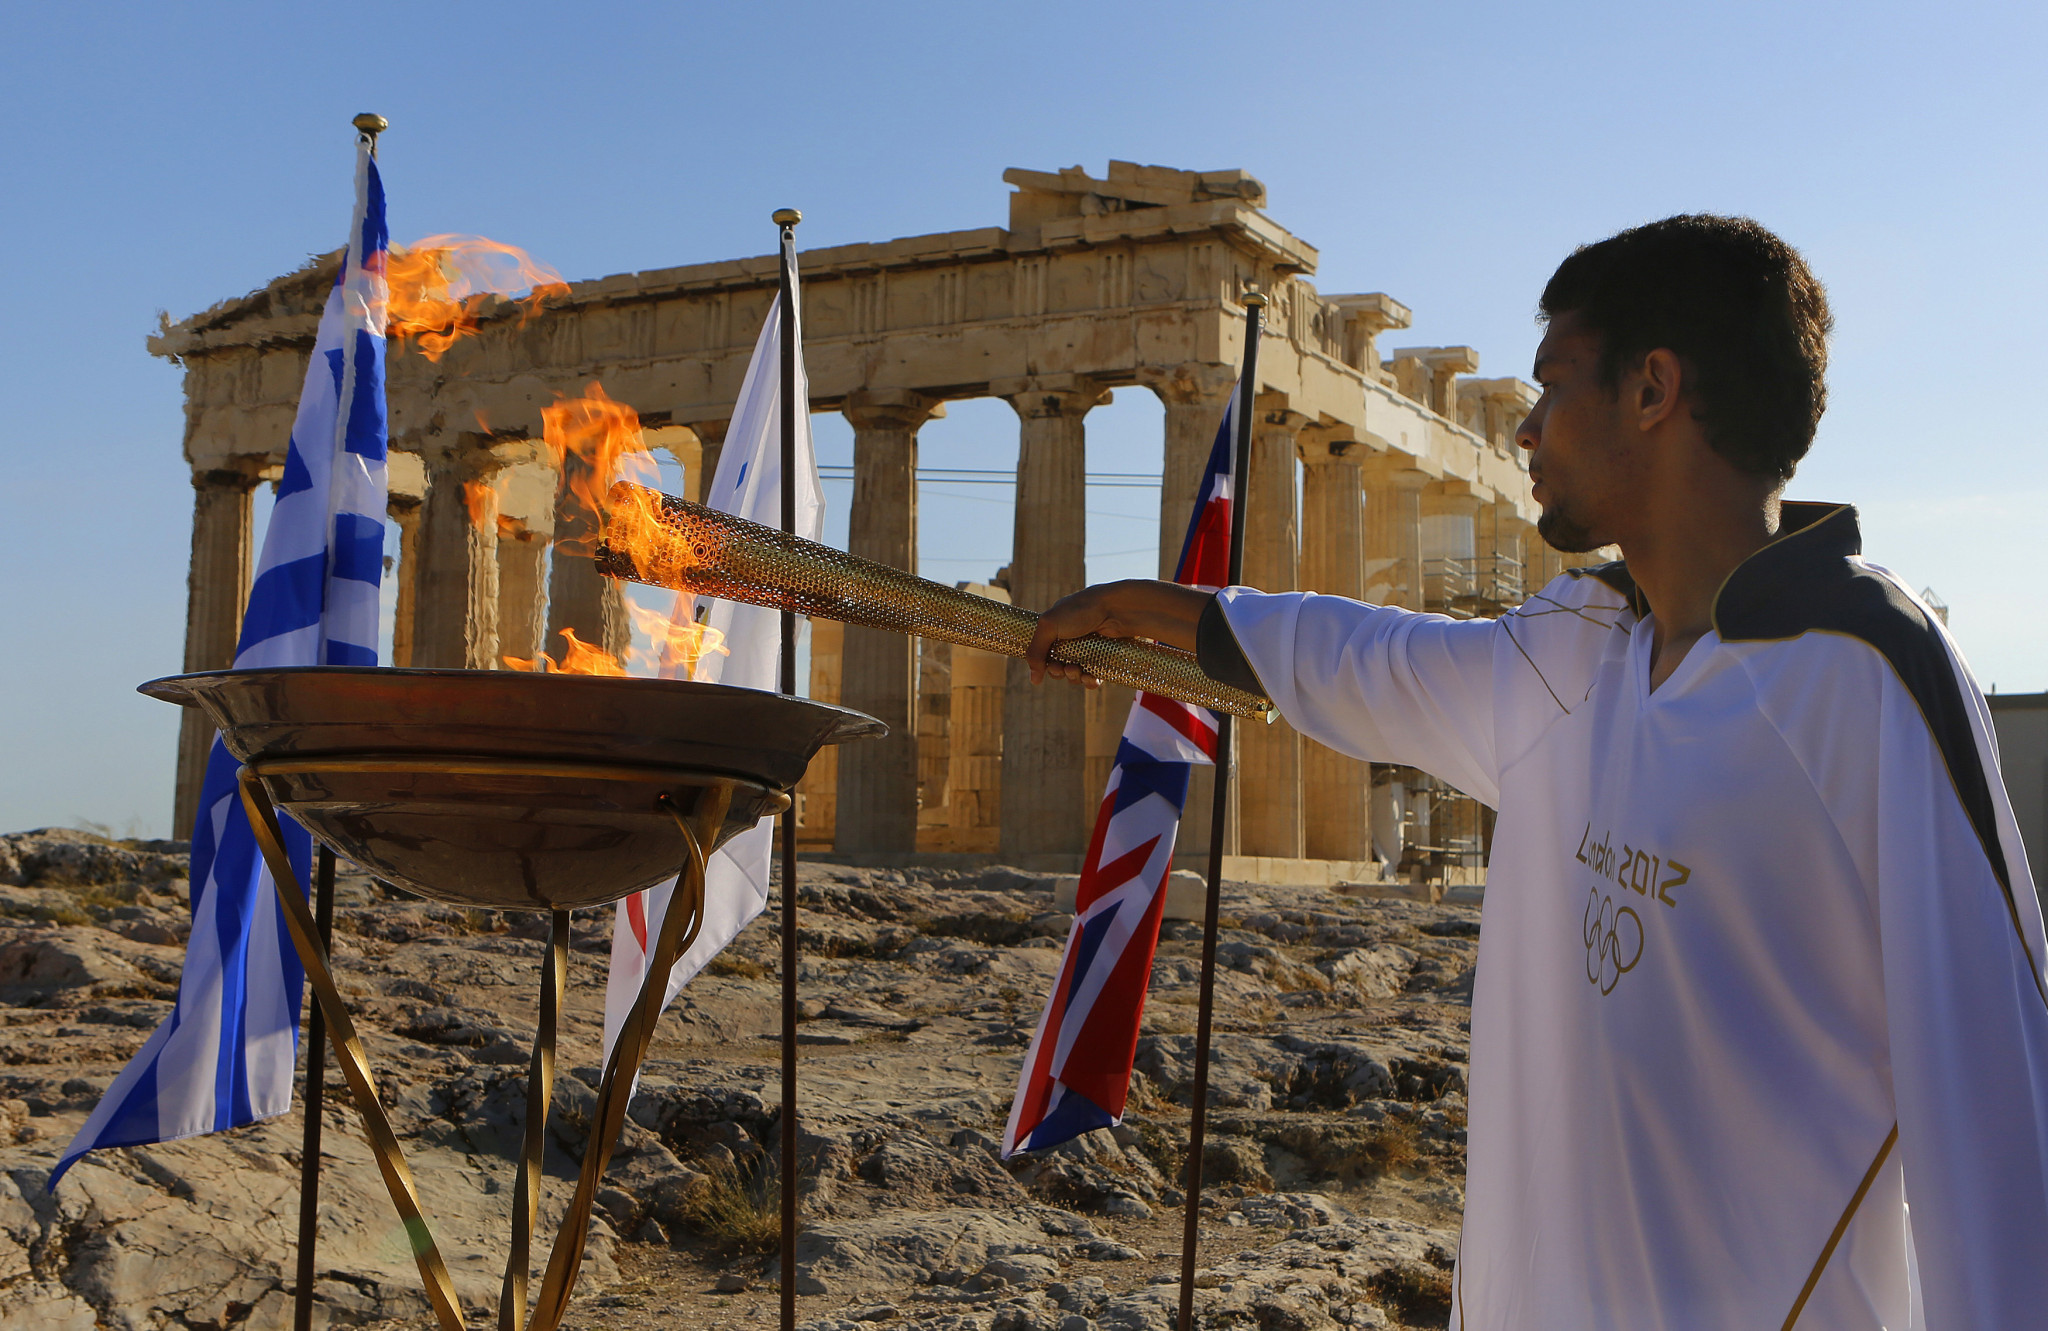 A traditional tripod was lit in front of the Parthenon by high jumper  Dimitrios Chondrokoukis who missed London 2012 after a positive doping test ©Getty Images